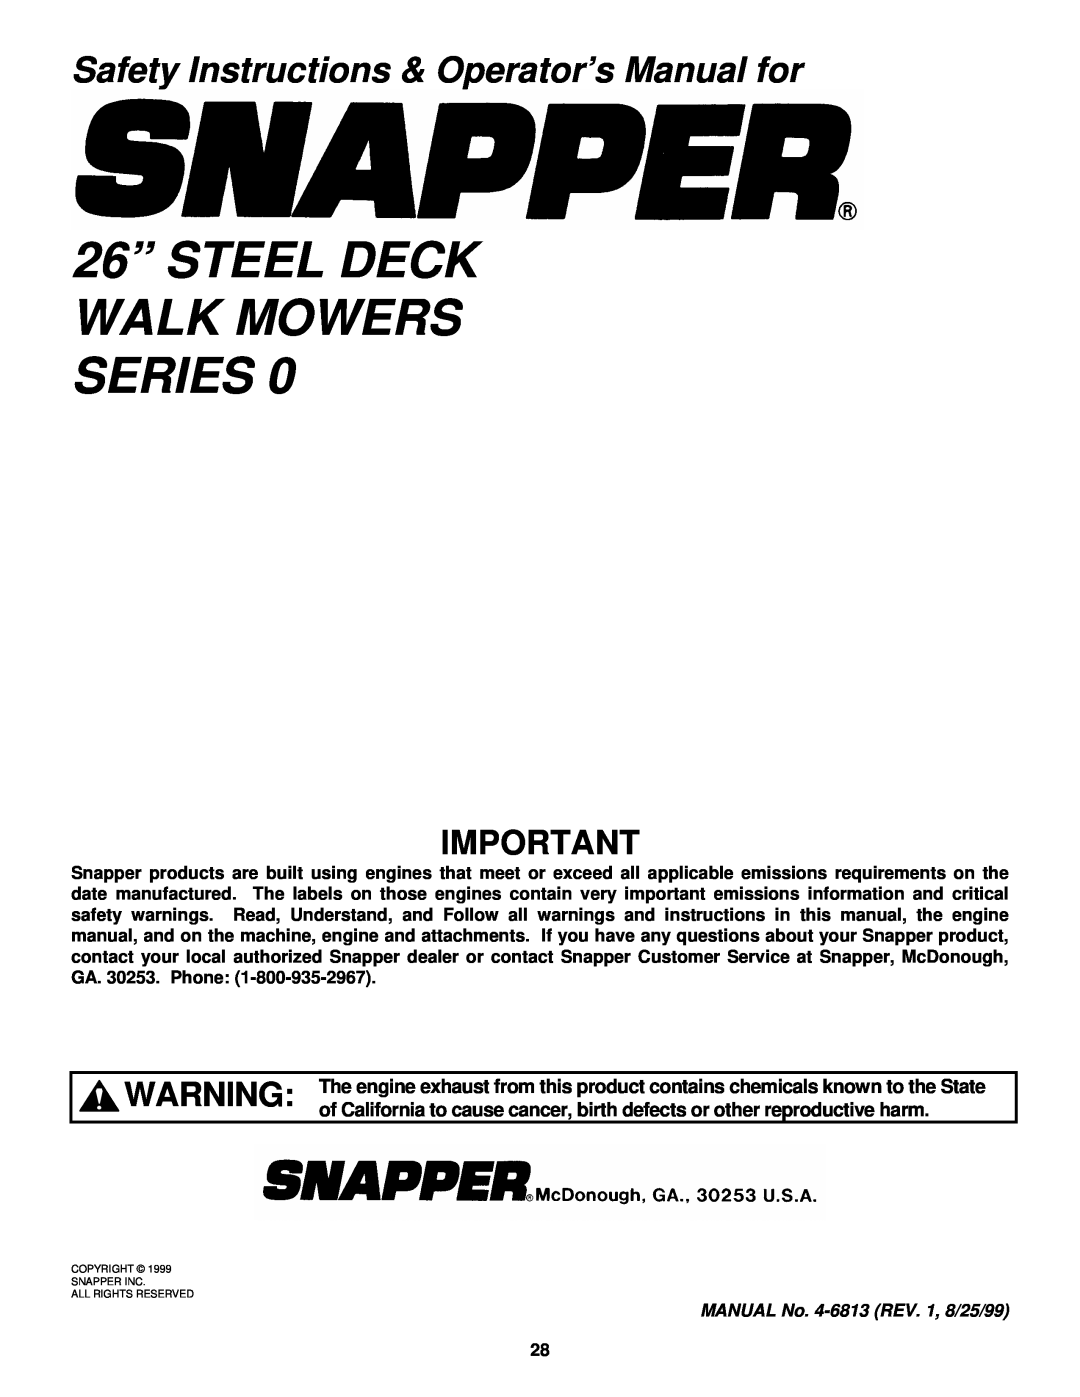 Snapper HWPS26600RV 26” STEEL DECK WALK MOWERS SERIES, Safety Instructions & Operator’s Manual for 